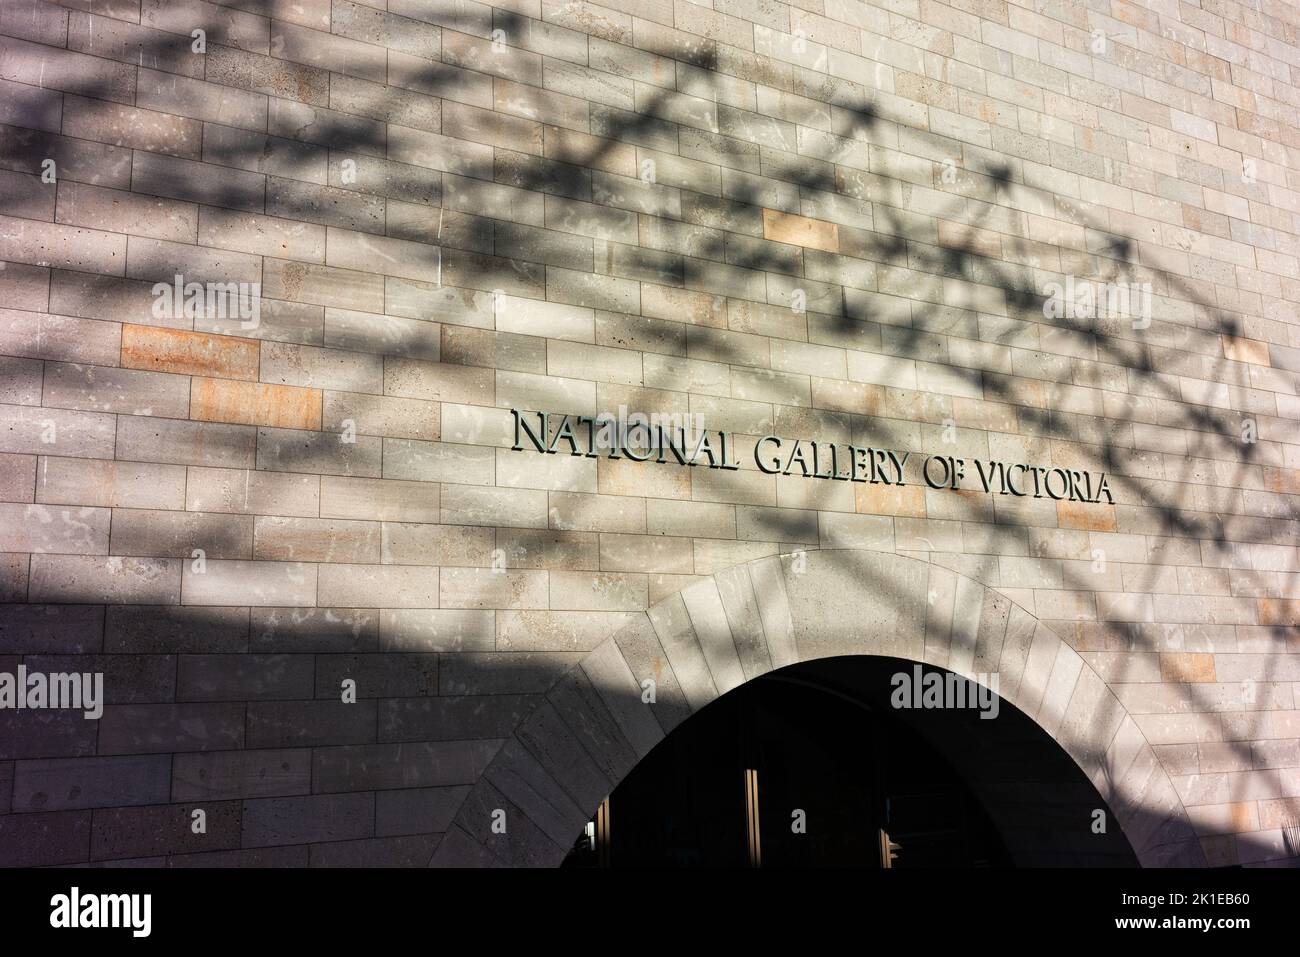 National Gallery of Victoria building with shadow of spire structure. Stock Photo